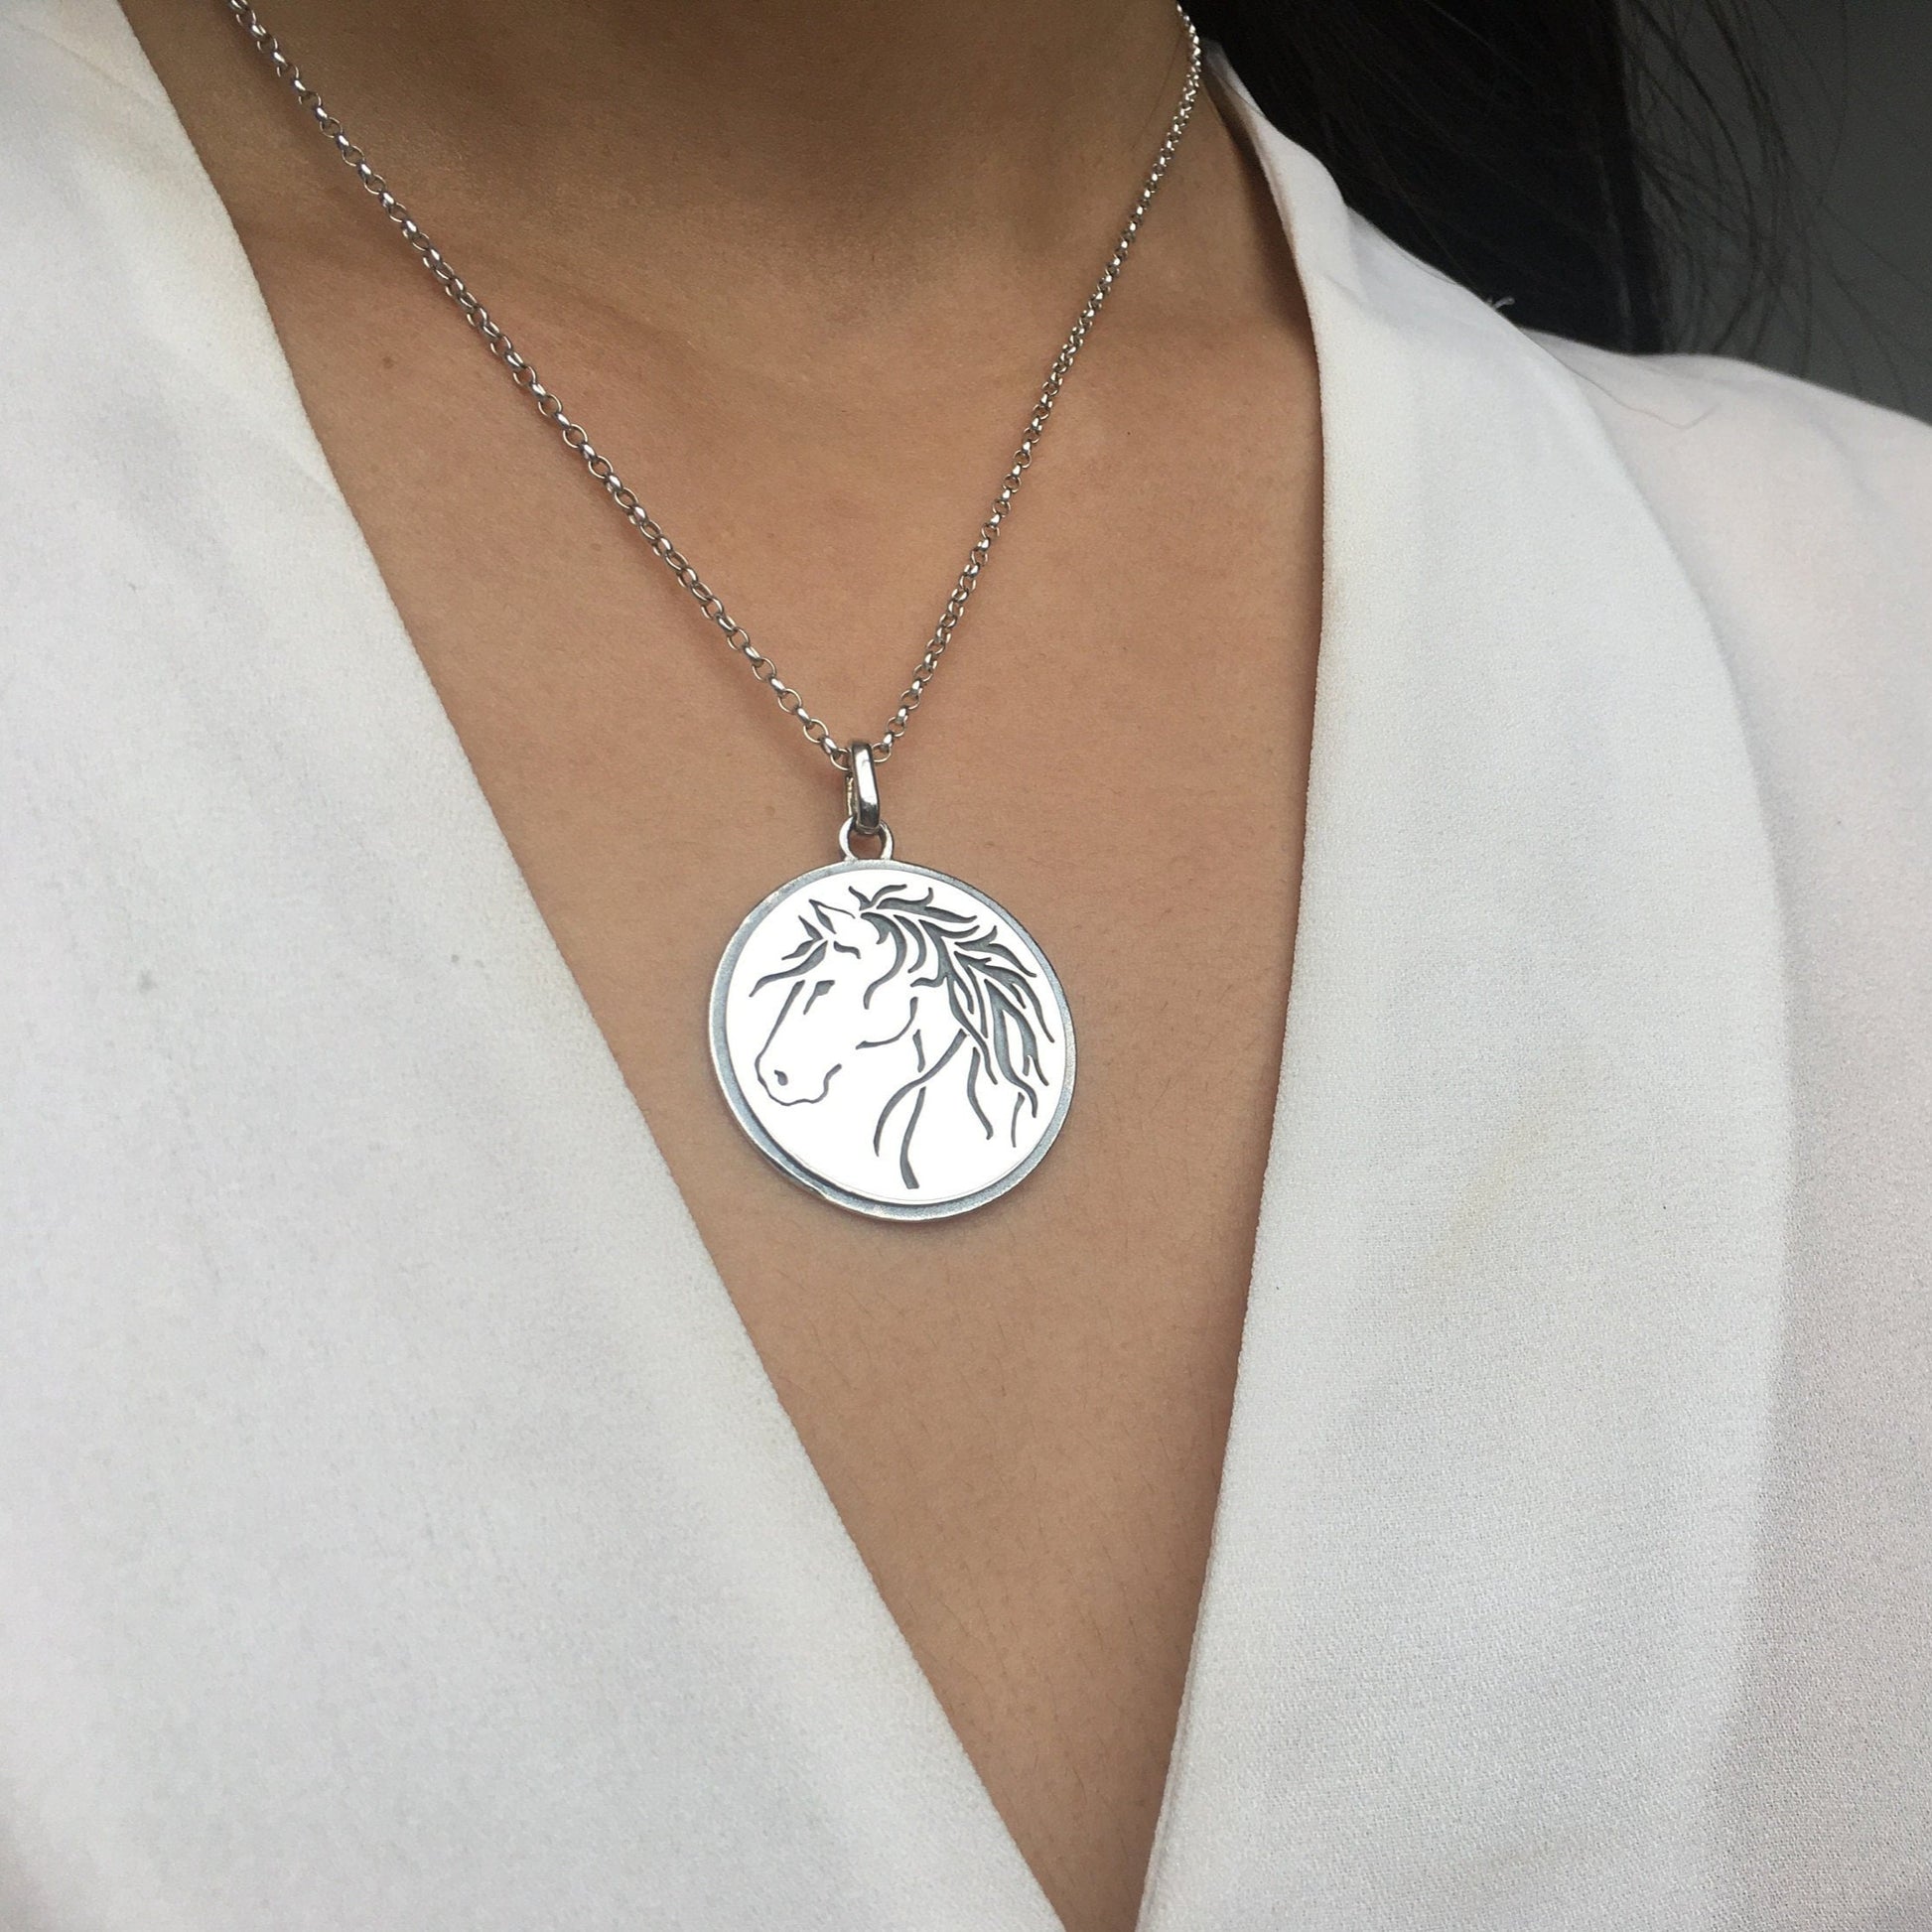 Silver Horse Head Pendant Necklace Horsehead Silver Necklace Equestrian Necklace Equine Jewelry Gift for Horse Lover Horses Head Jewellery